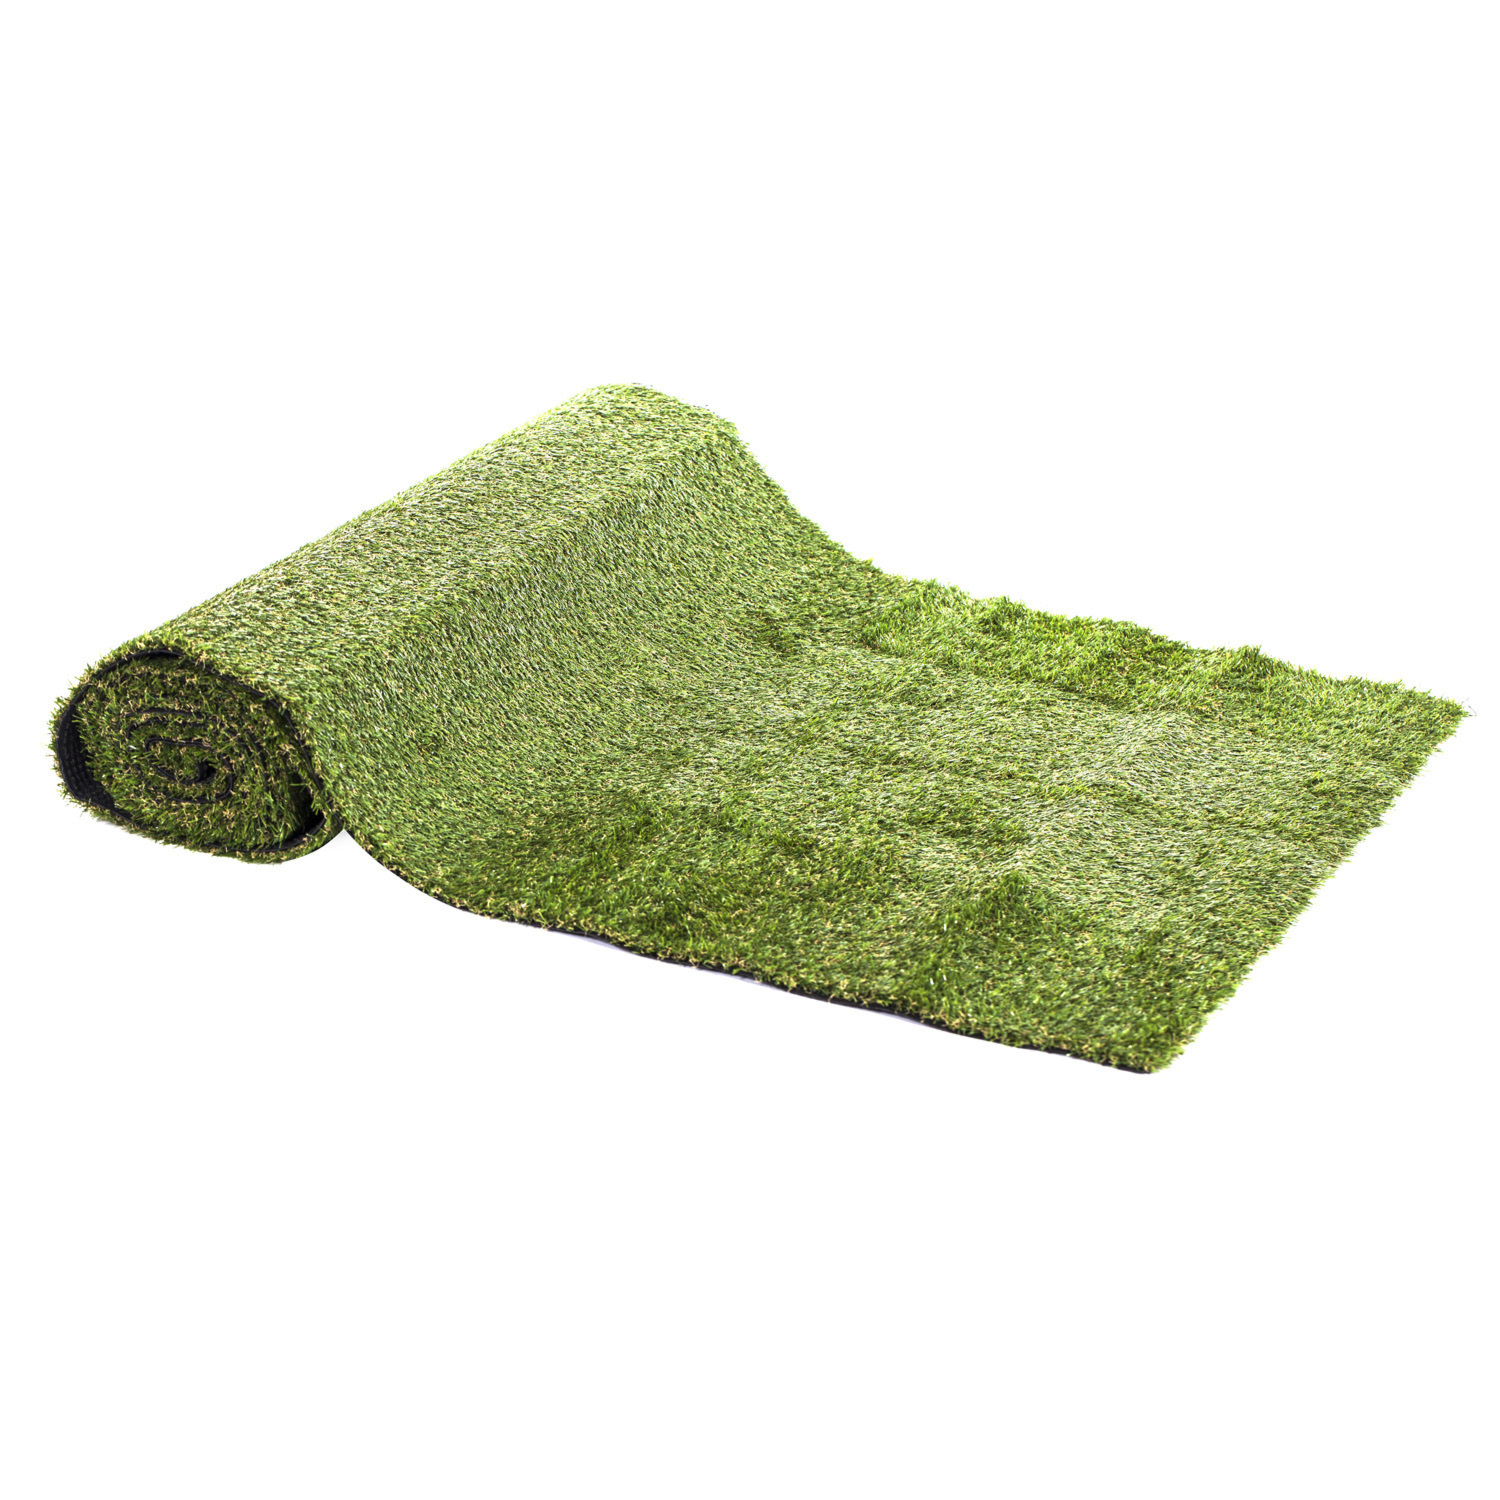 Green Artificial Turf Roll 1.5 x 4m Image 1